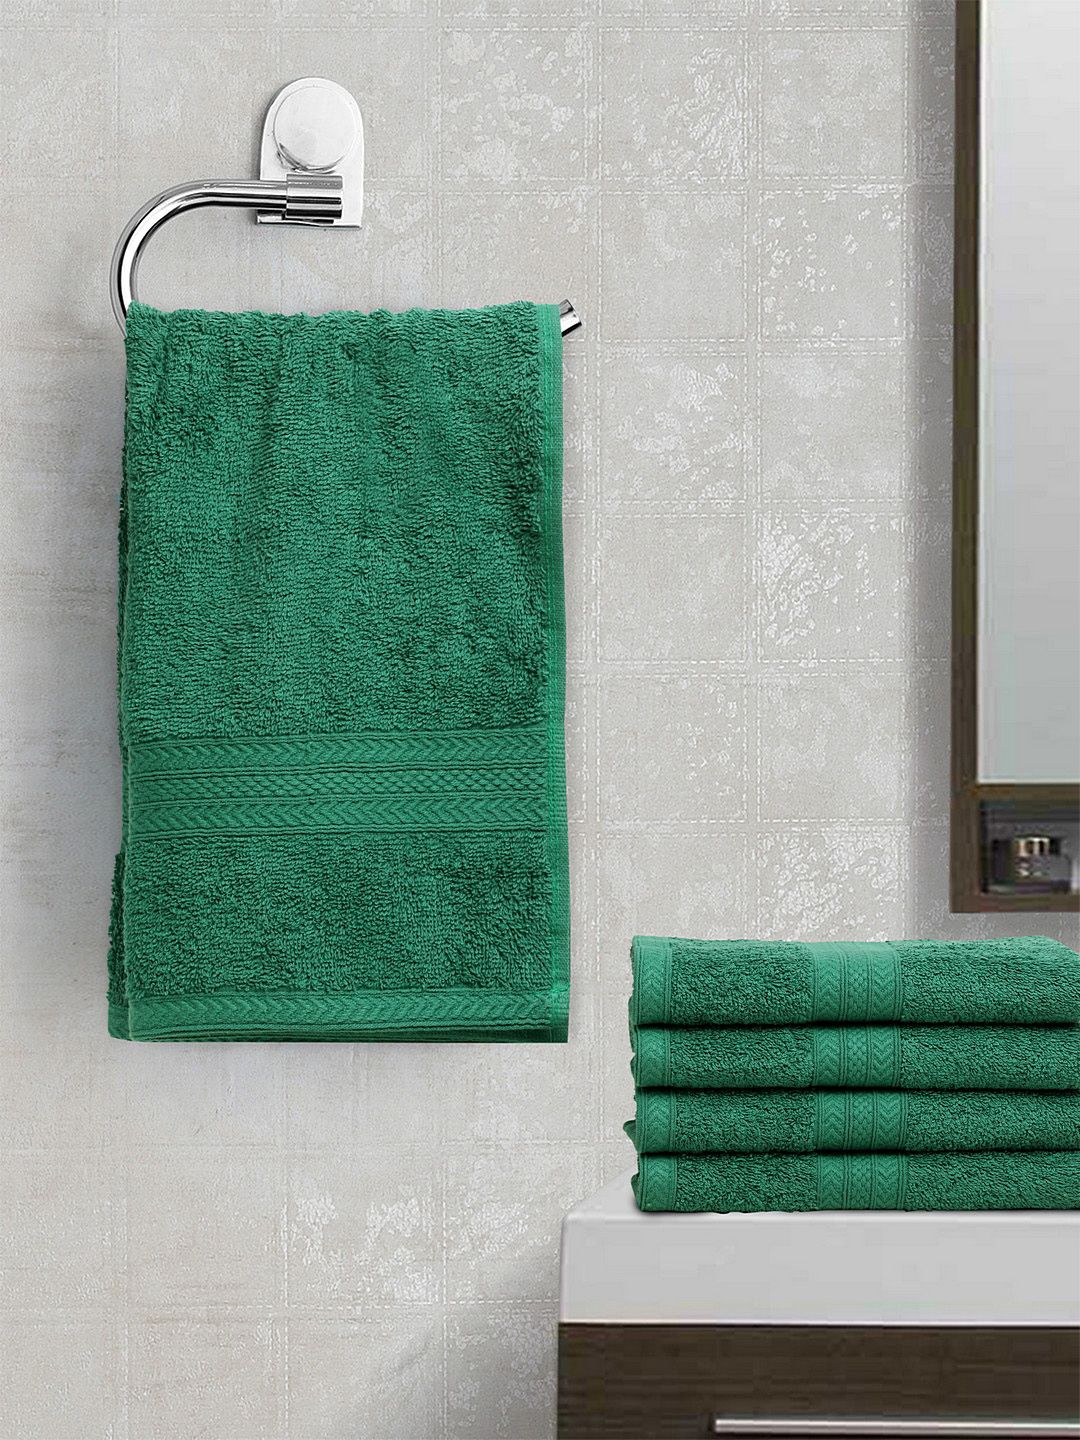 BOMBAY DYEING Unisex Set Of 5 Green Solid Tulip 450 GSM Hand Towels Price in India